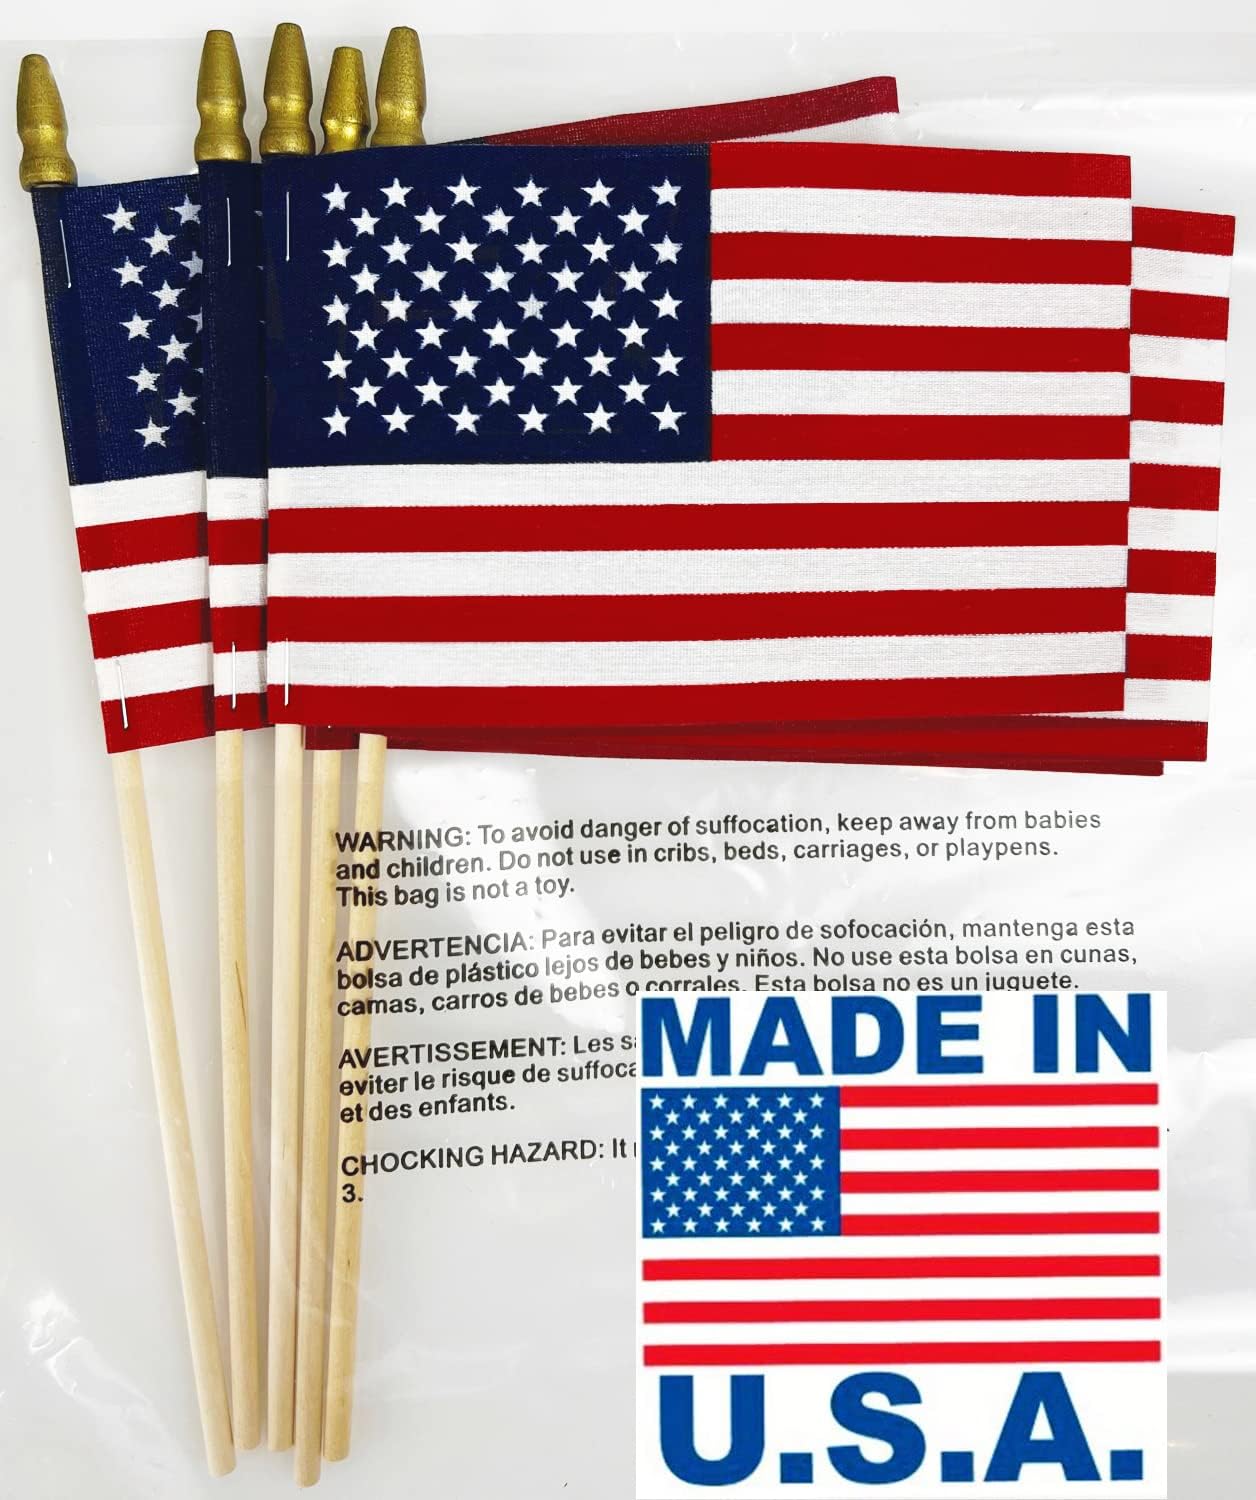 GIFTEXPRESS 4*6 Inch Proudly Made in U.S.A. Small American Flags